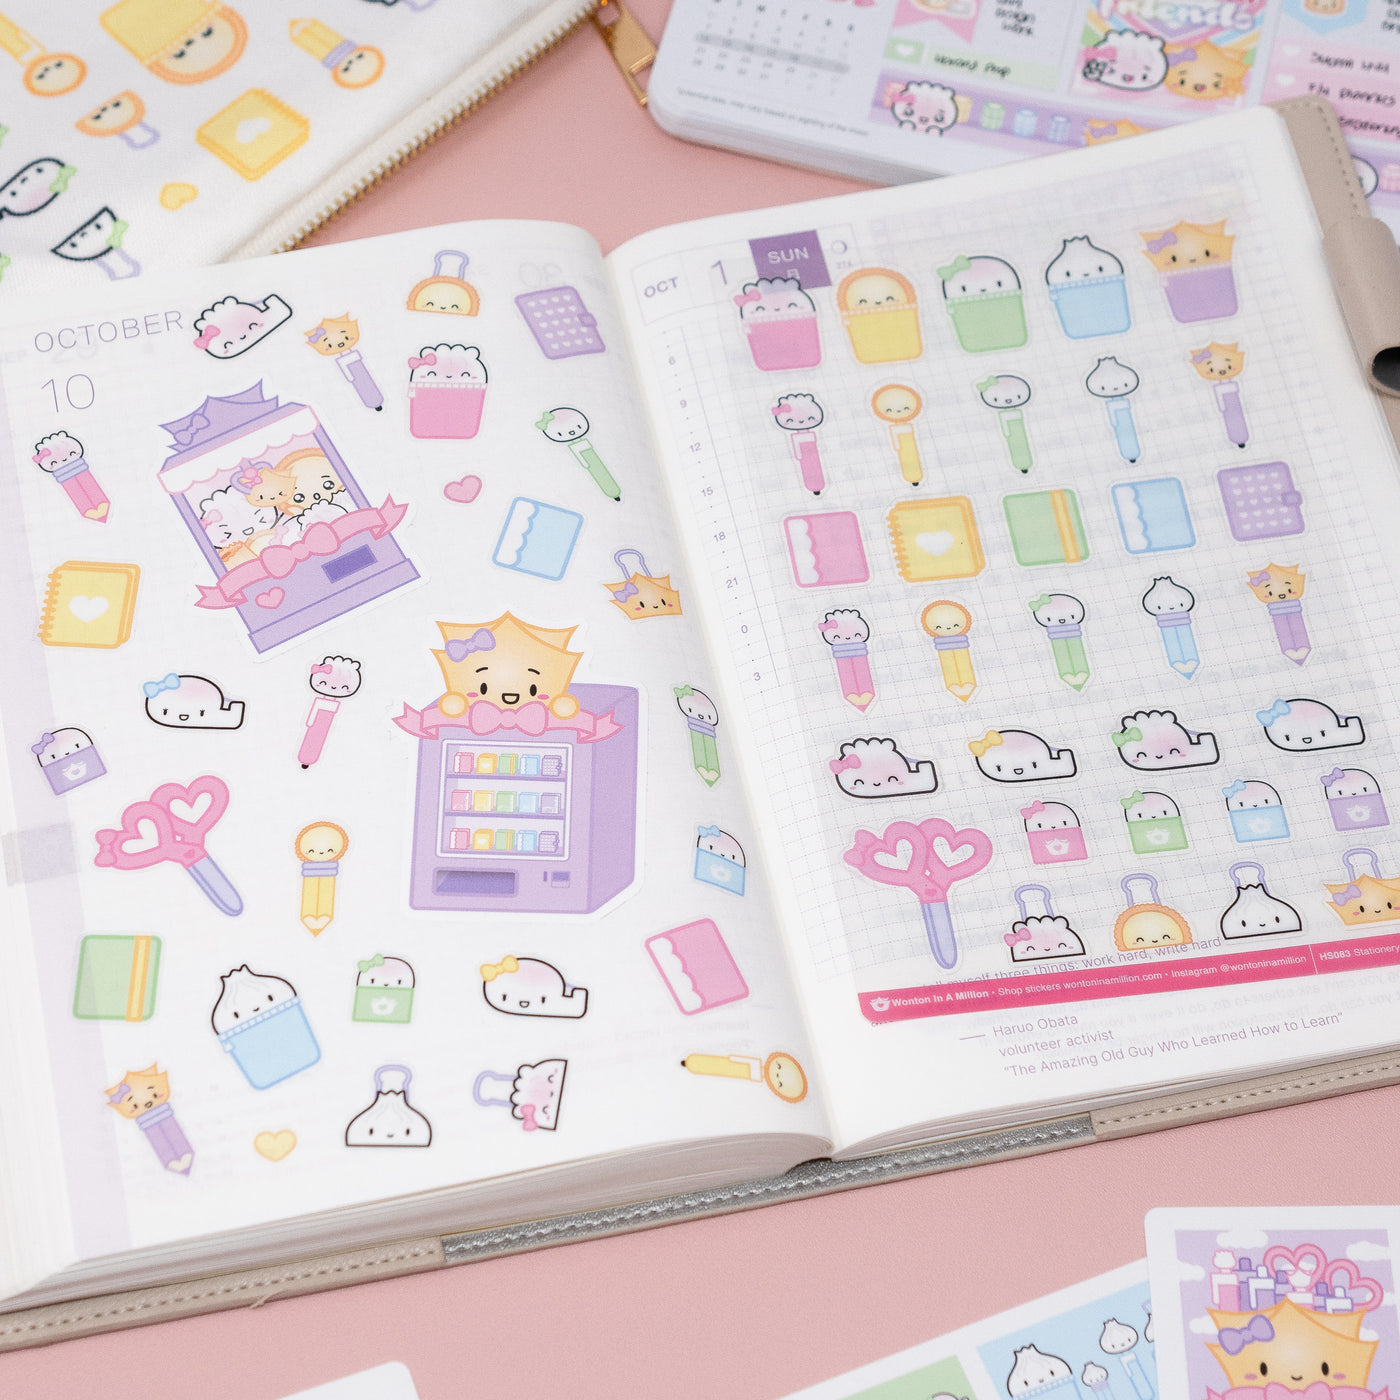 HS083 | Wonton of Stationery Supplies Transparent Stickers